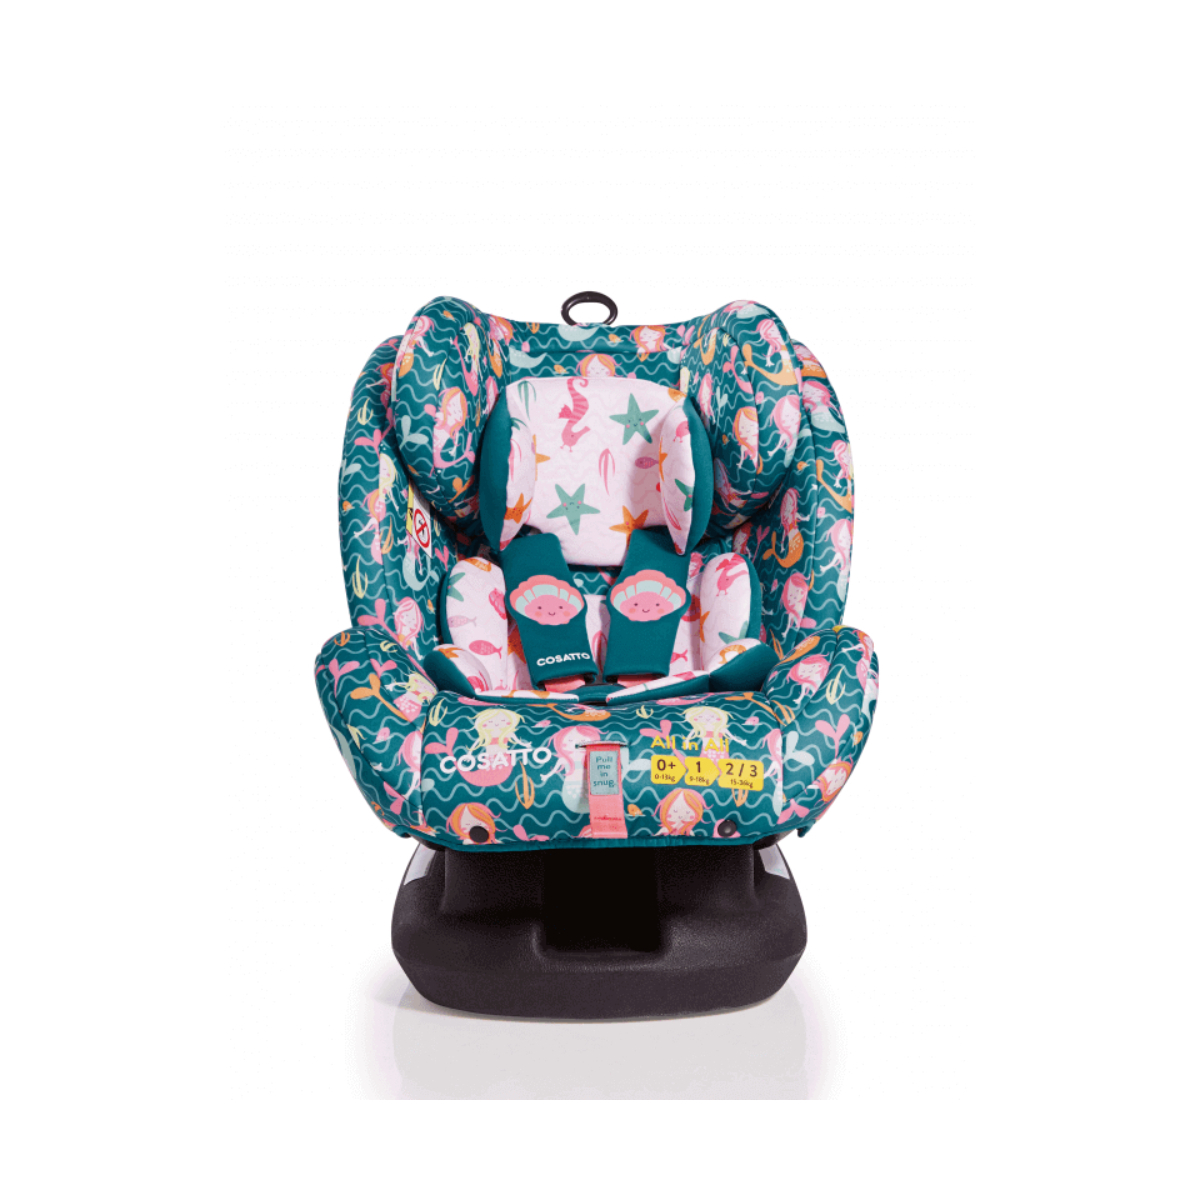 Cosatto All in All Group 0+123 Car Seat